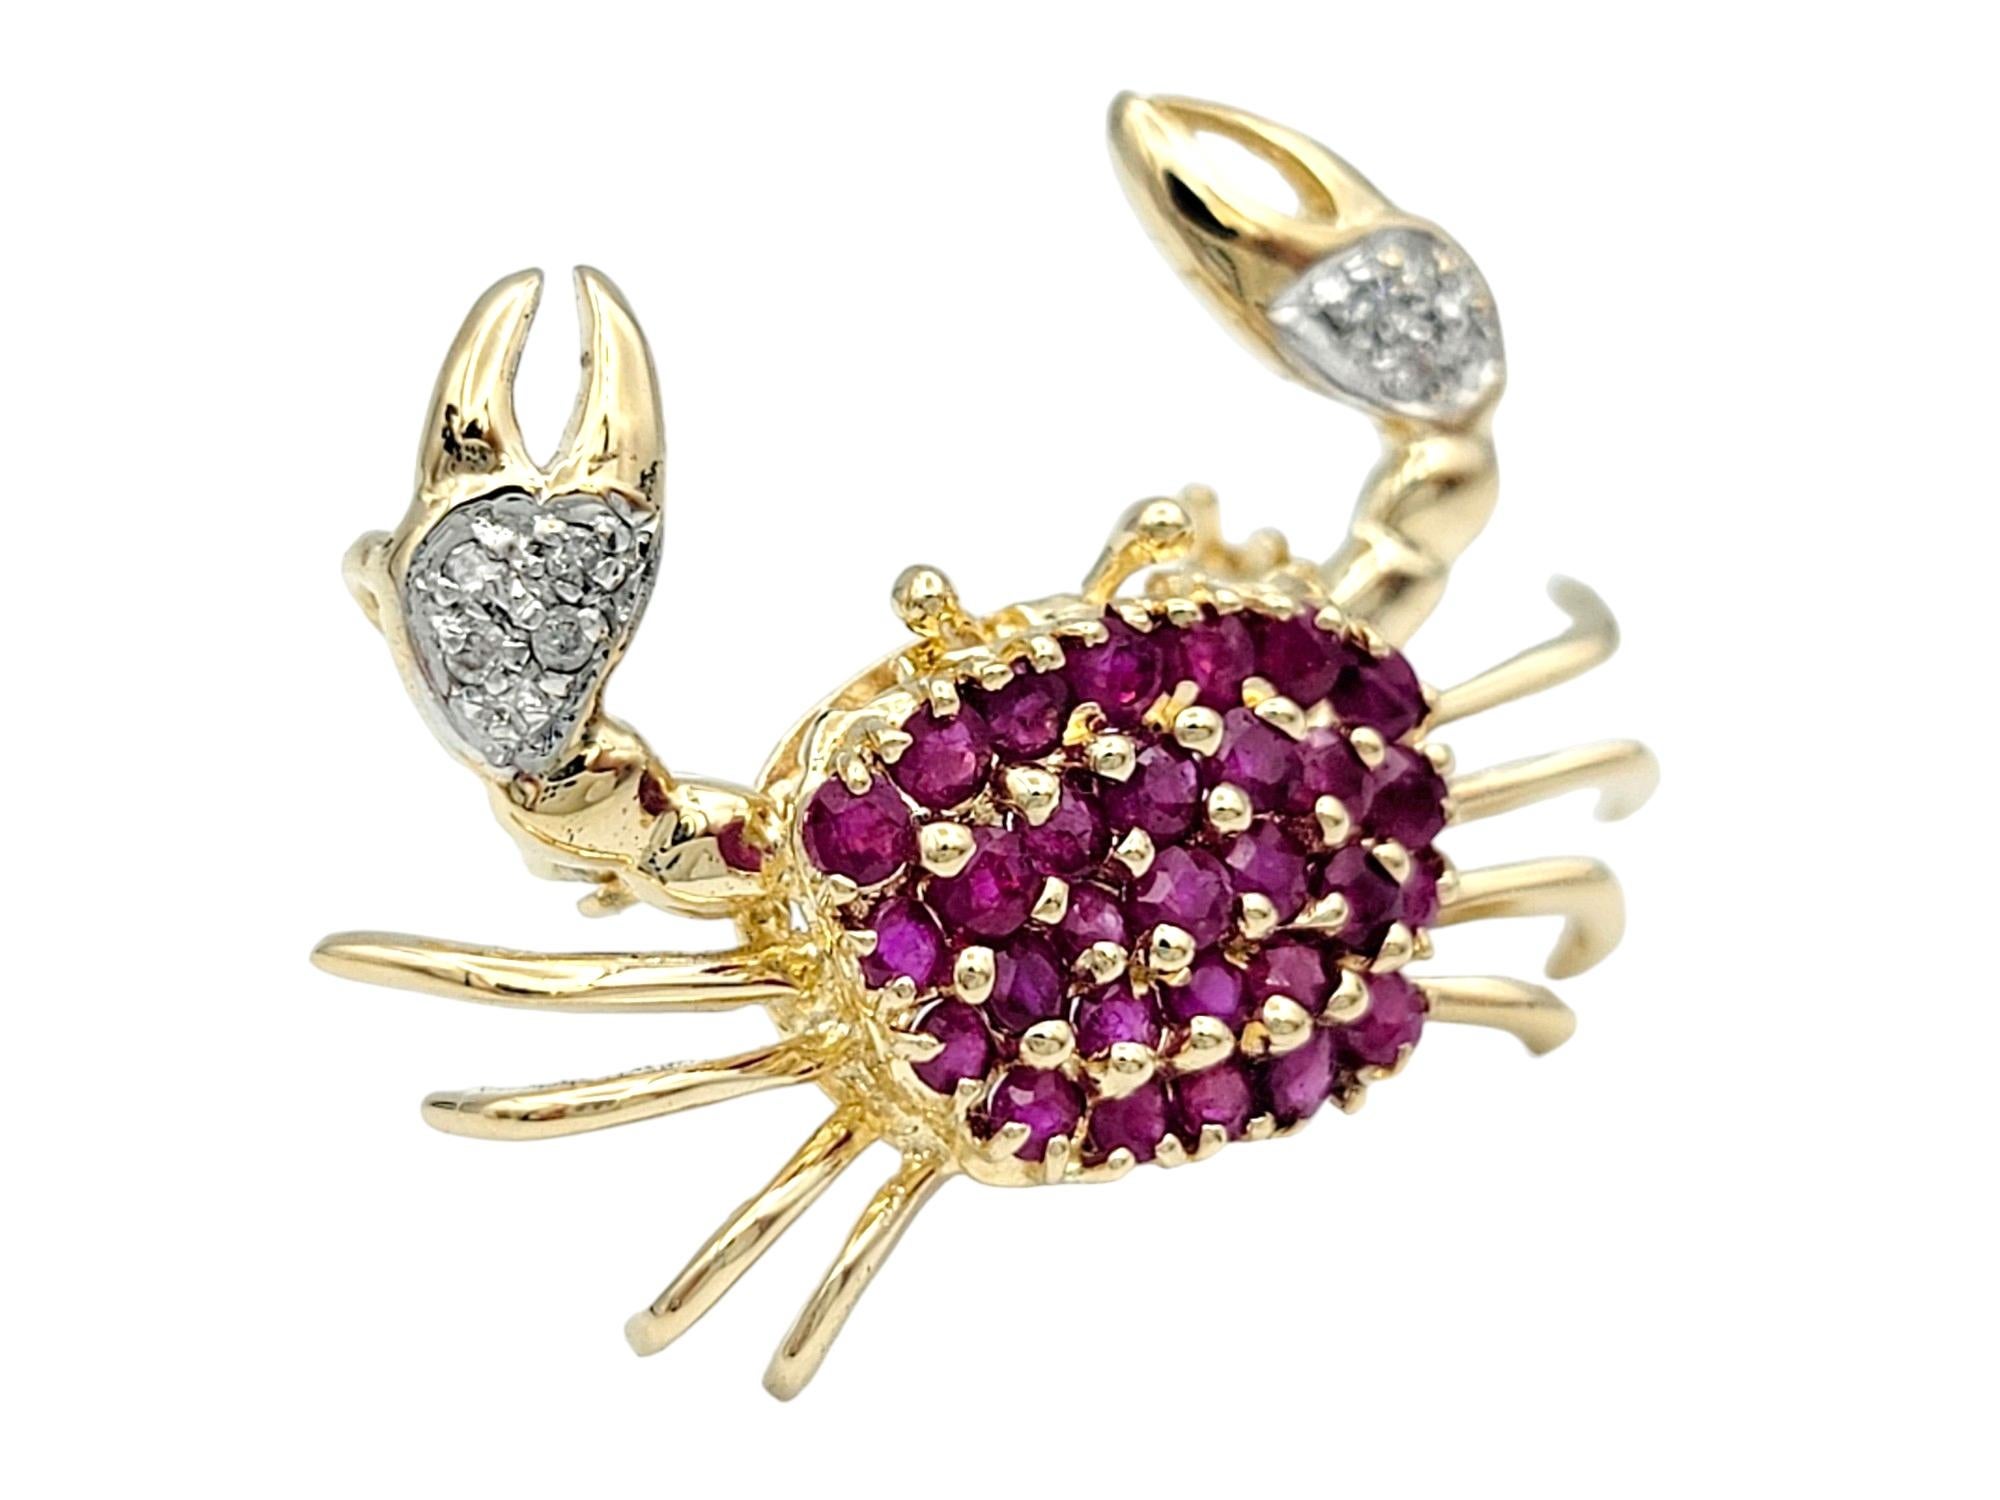 This beautiful crab brooch or pendant, set in lustrous 14 karat yellow gold, is a captivating and unique piece of jewelry. The body of the crab is adorned with vibrant red rubies, creating a striking and eye-catching display. The use of rubies for